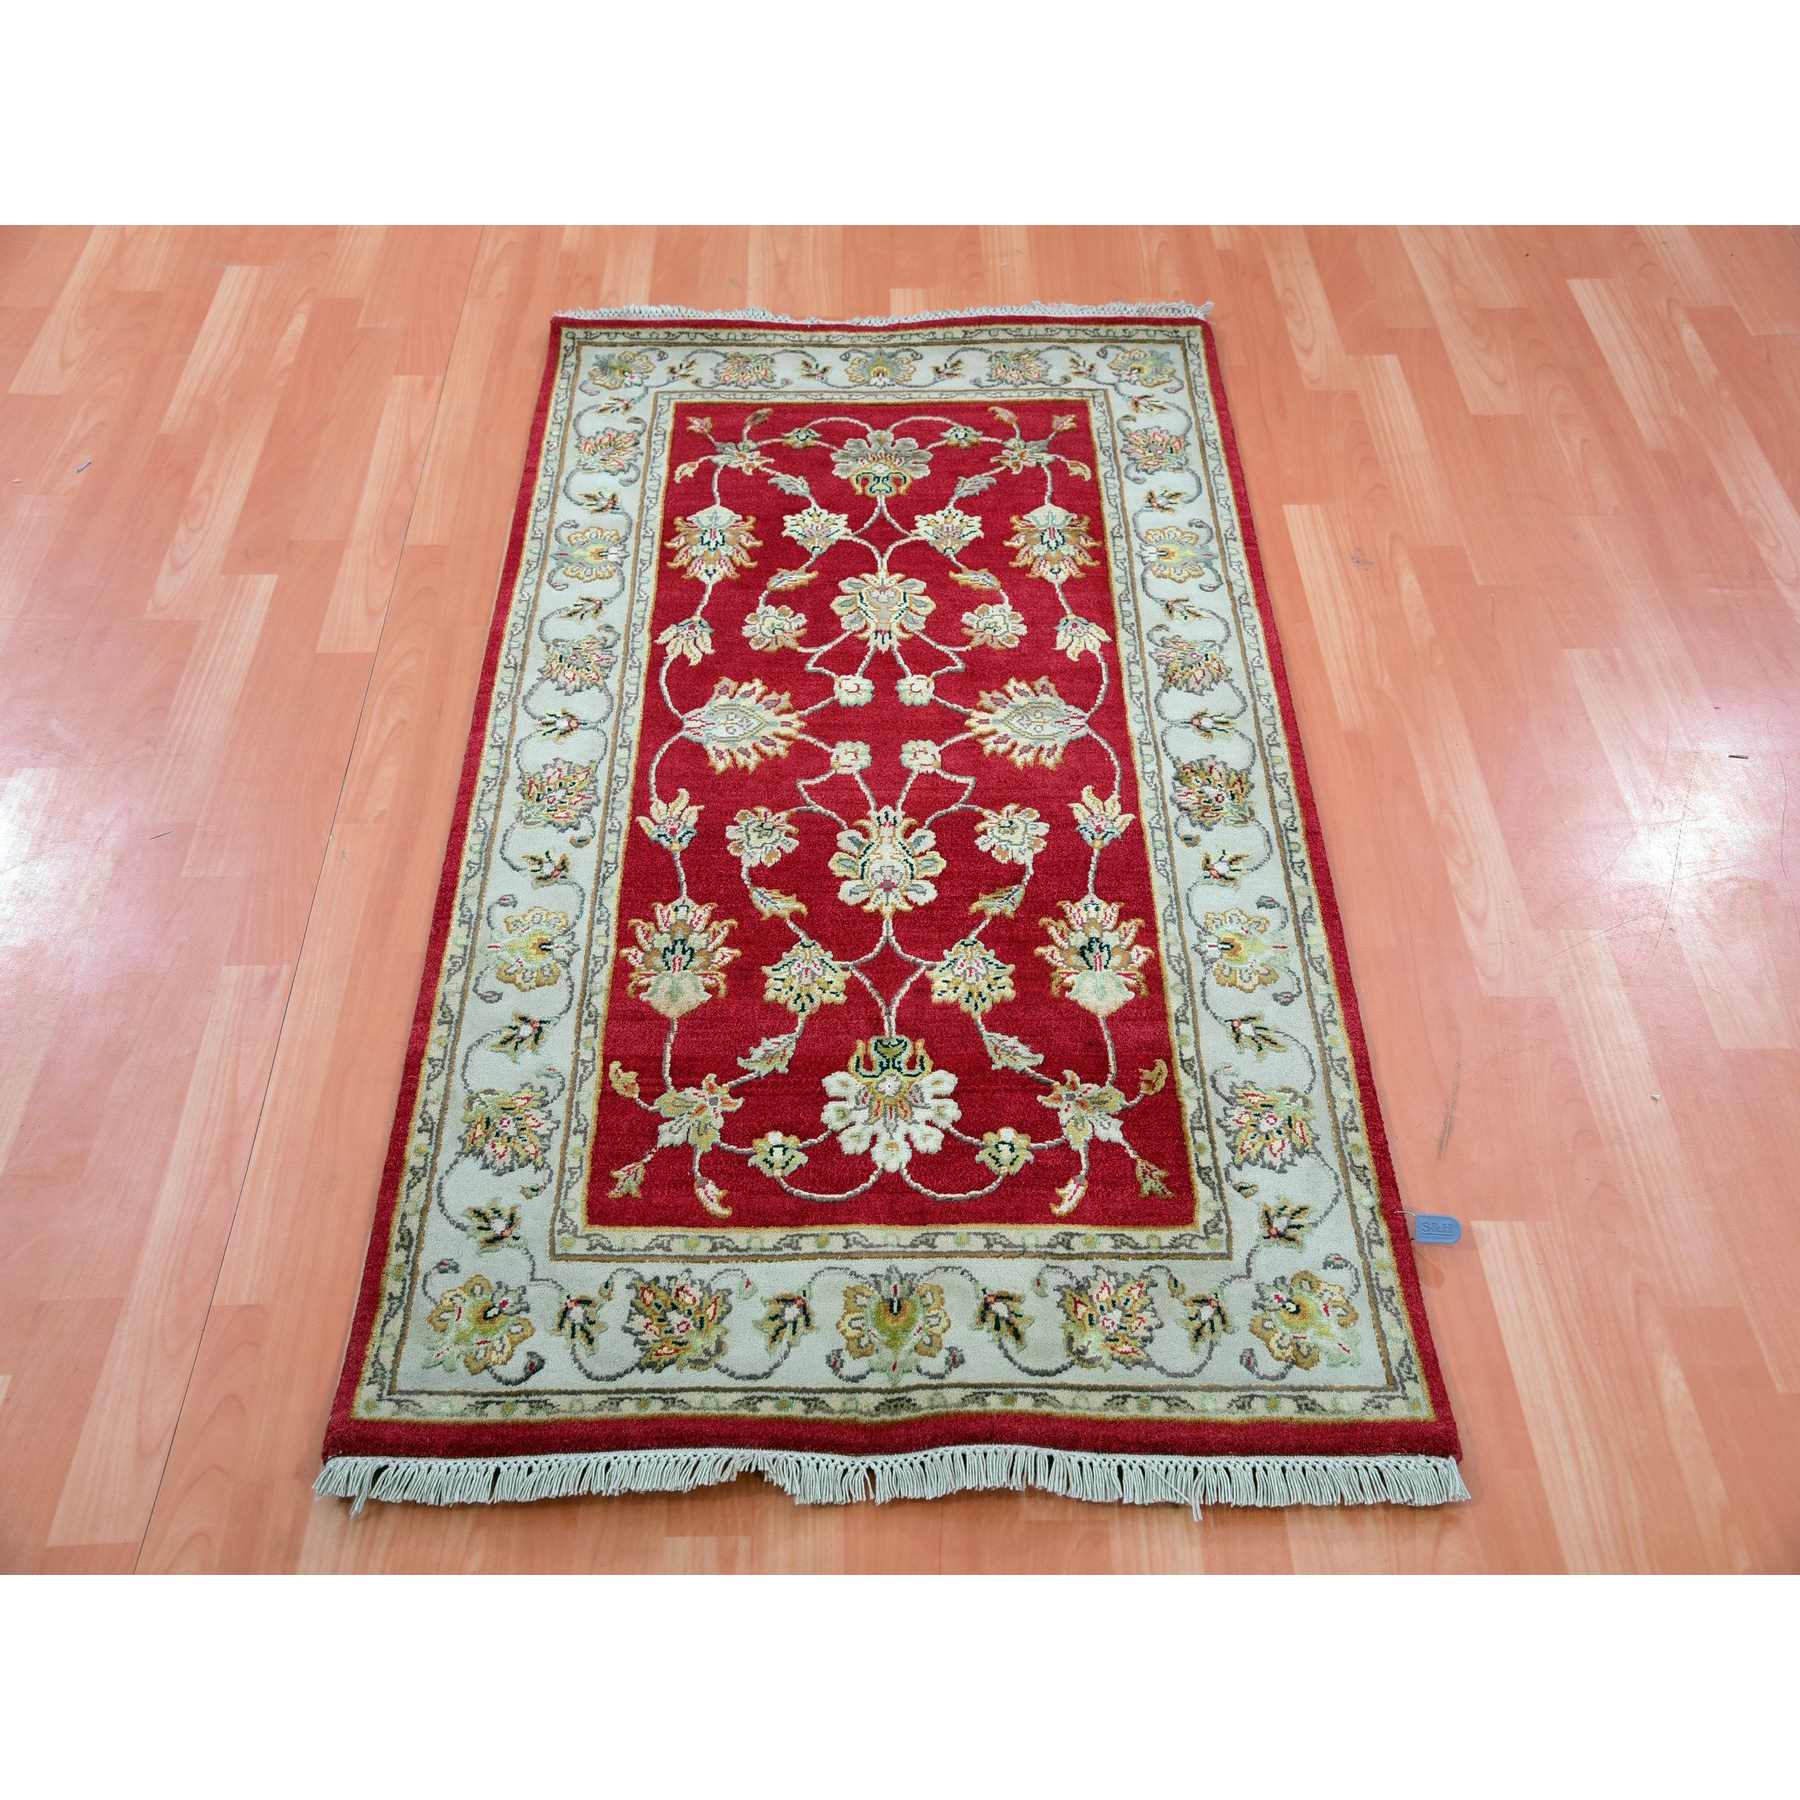 Rajasthan-Hand-Knotted-Rug-377010